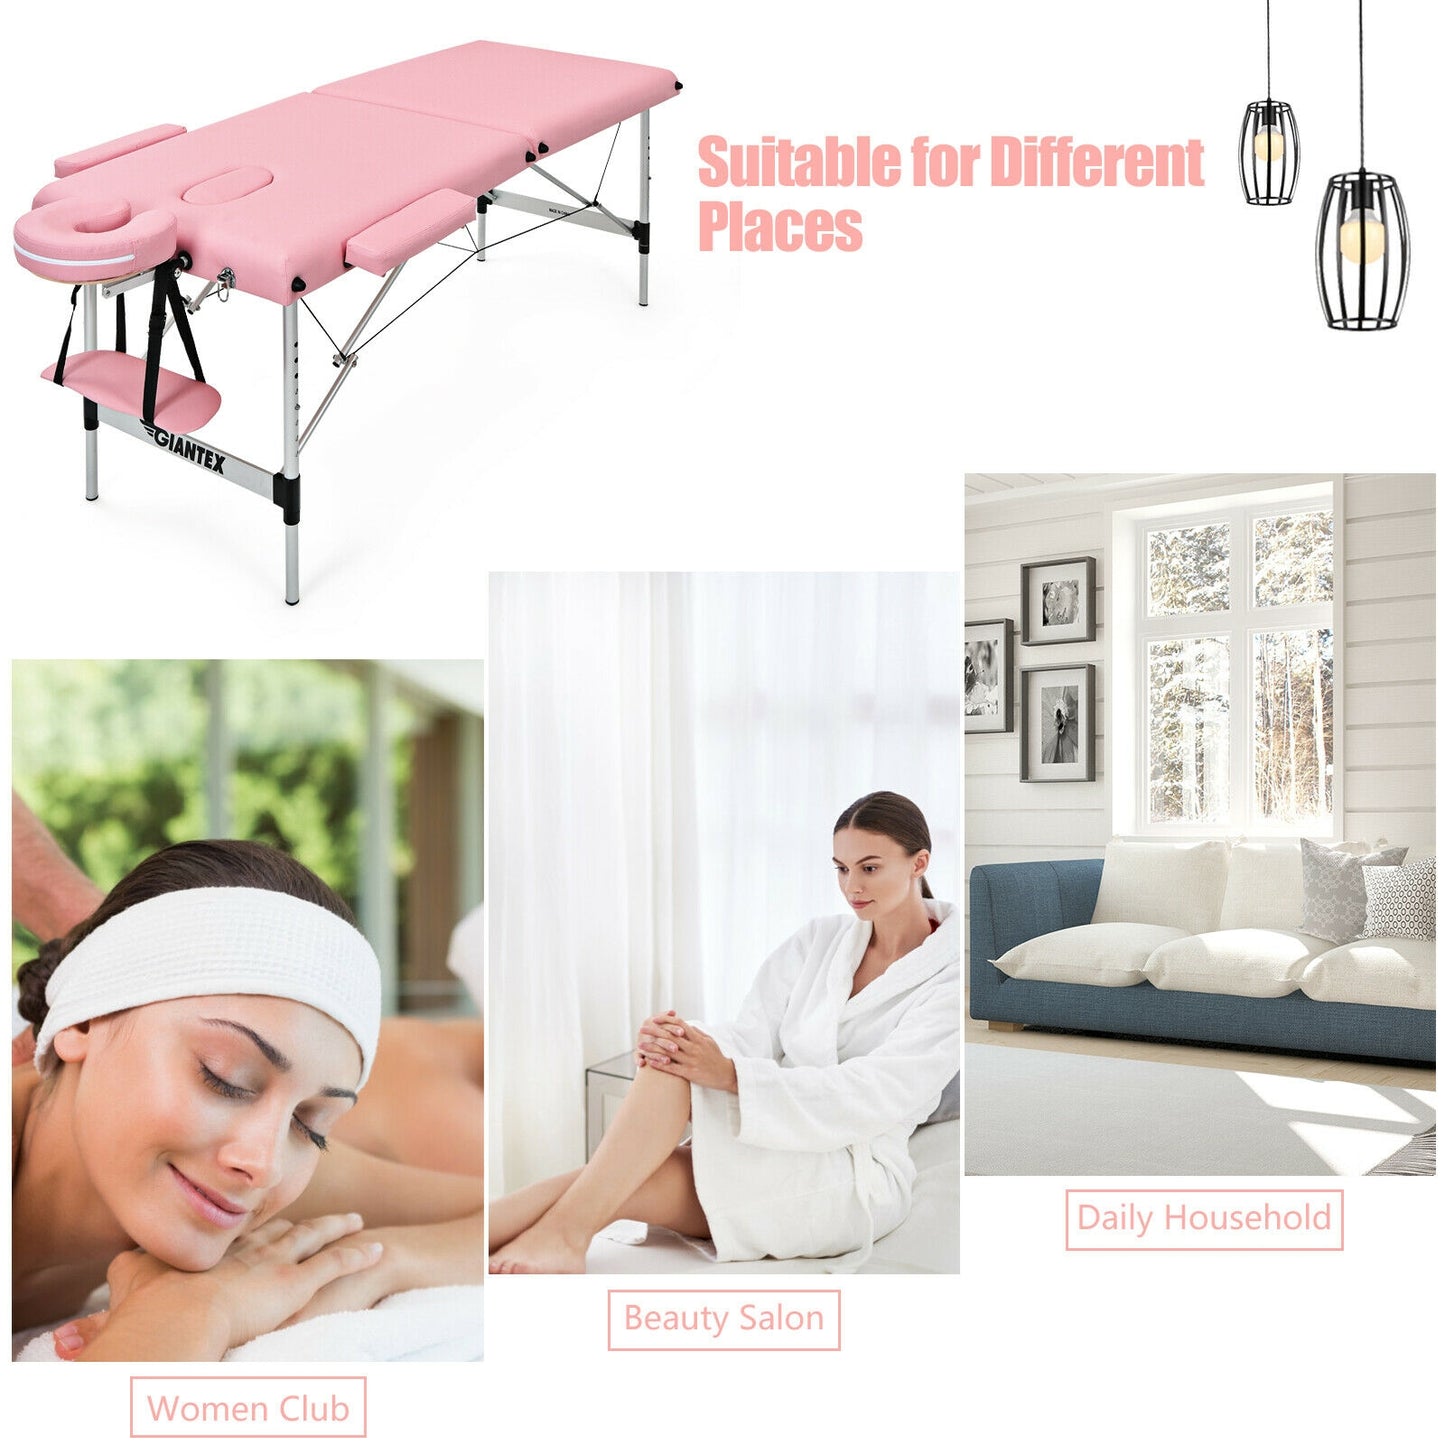 84 Inch L Portable Adjustable Massage Bed with Carry Case for Facial Salon Spa-Pink